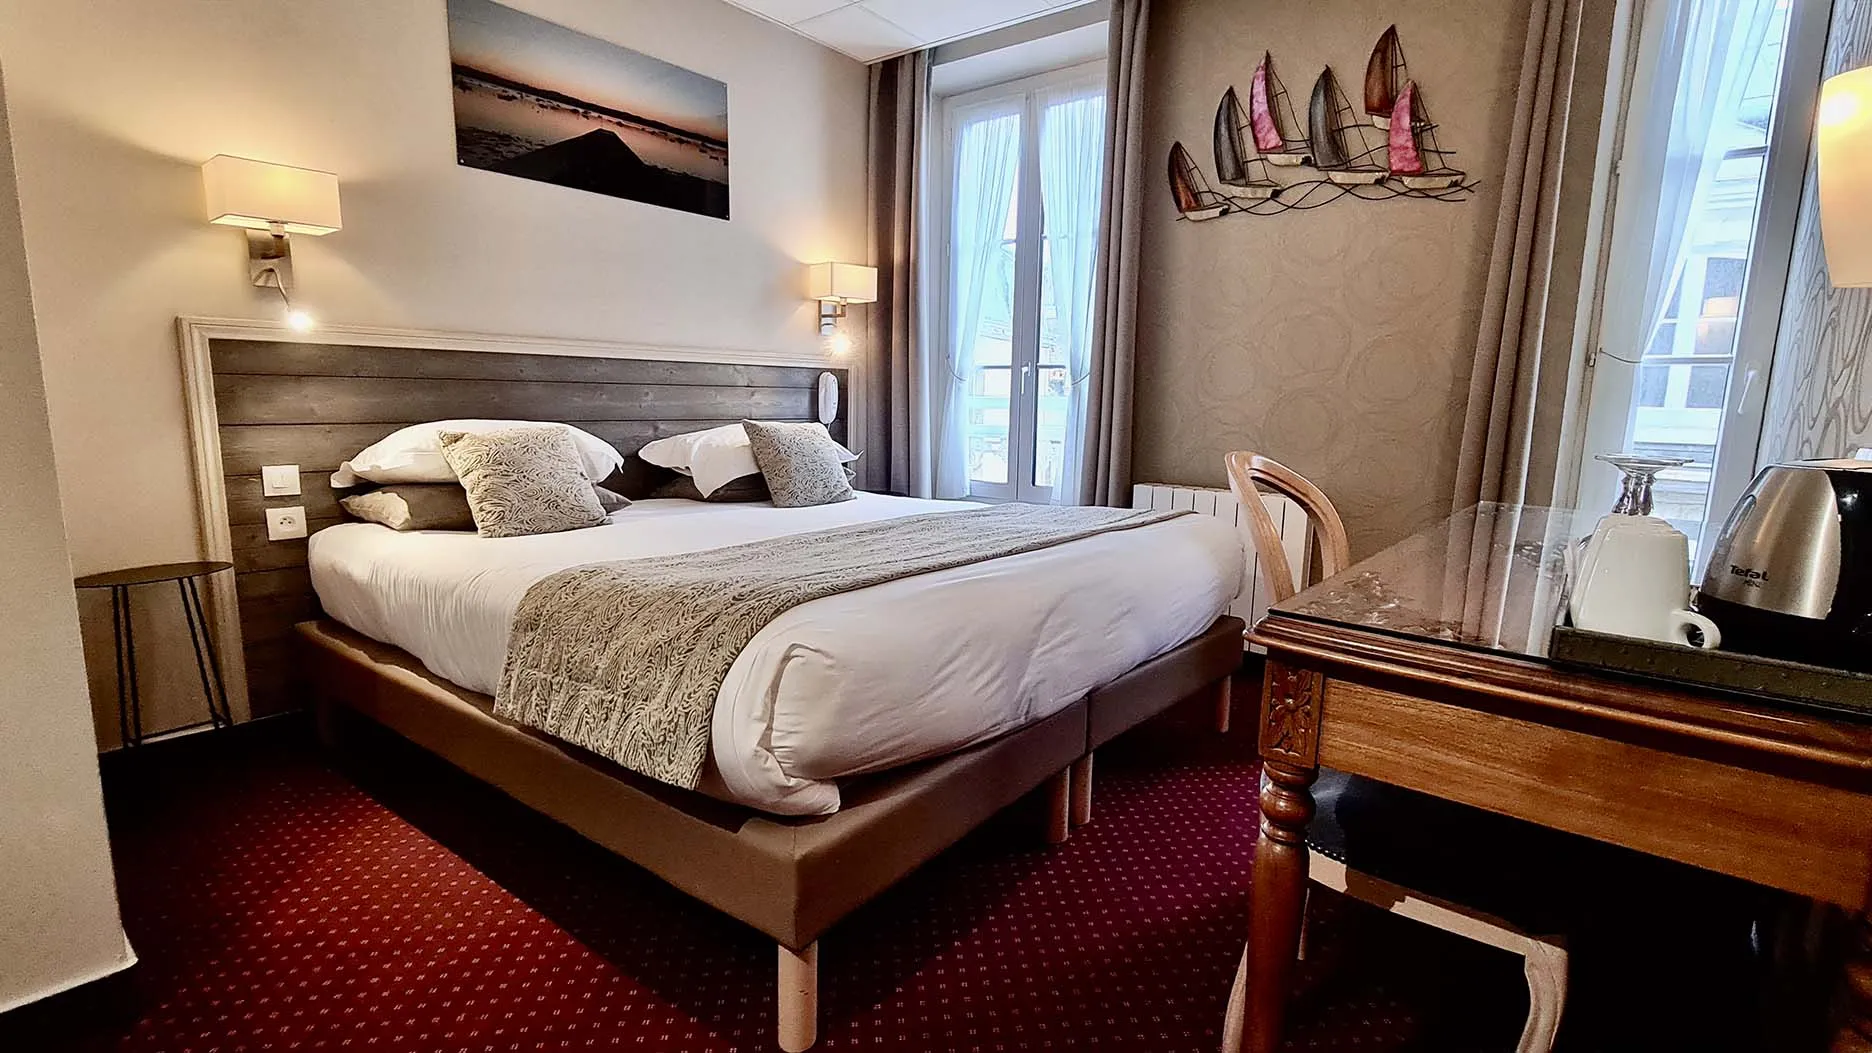 St-Malo Places to Stay: My Recommendations of the Best Accommodations